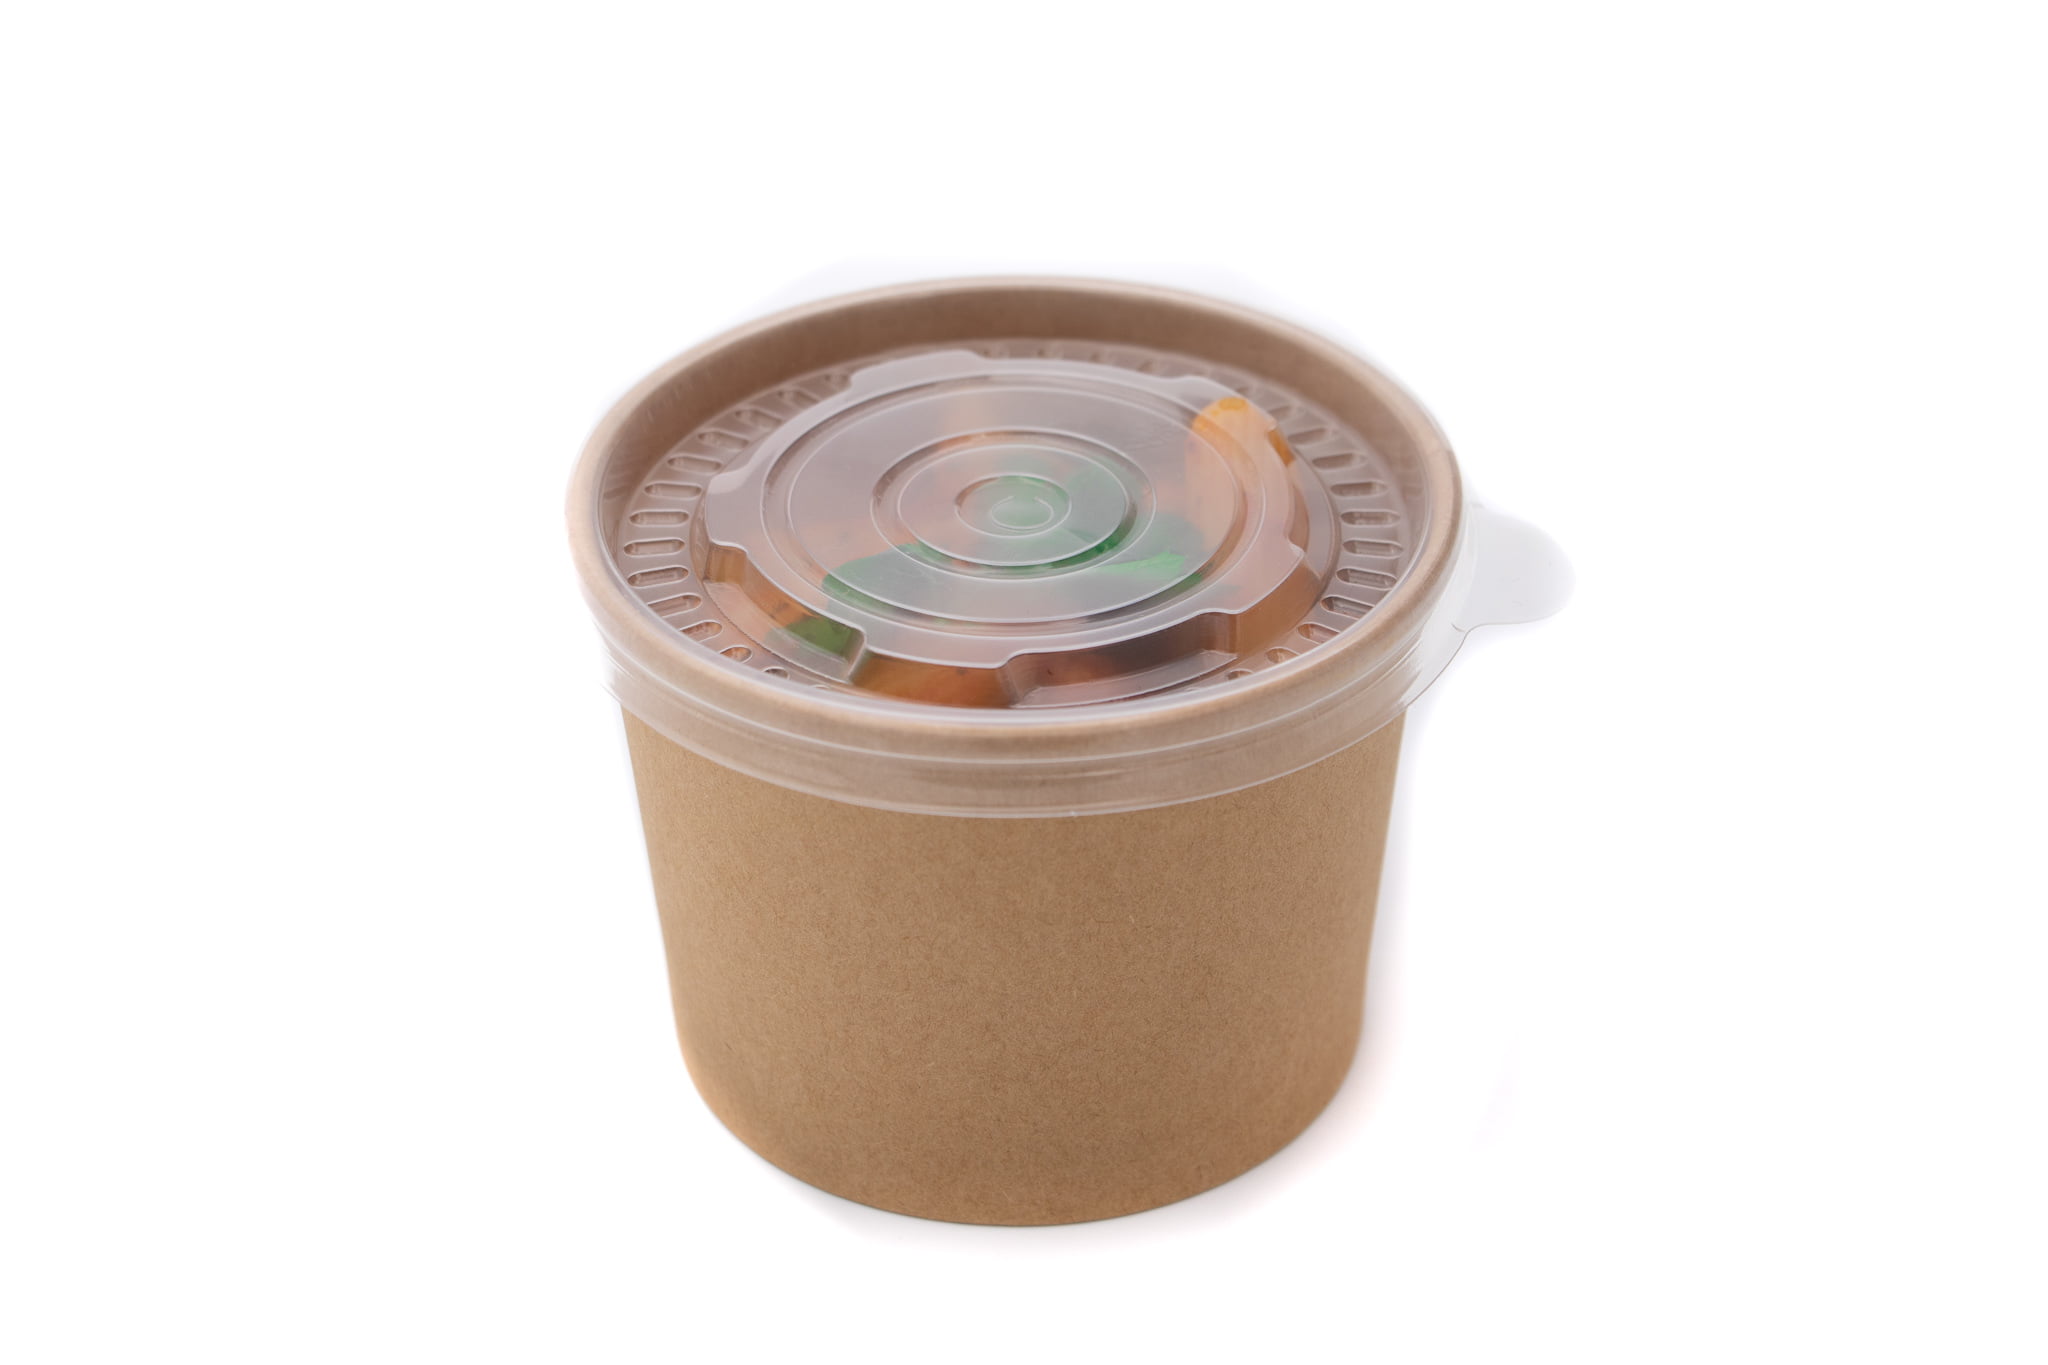 Smygoods 12oz Paper Soup Containers With Lids, Disposable Soup